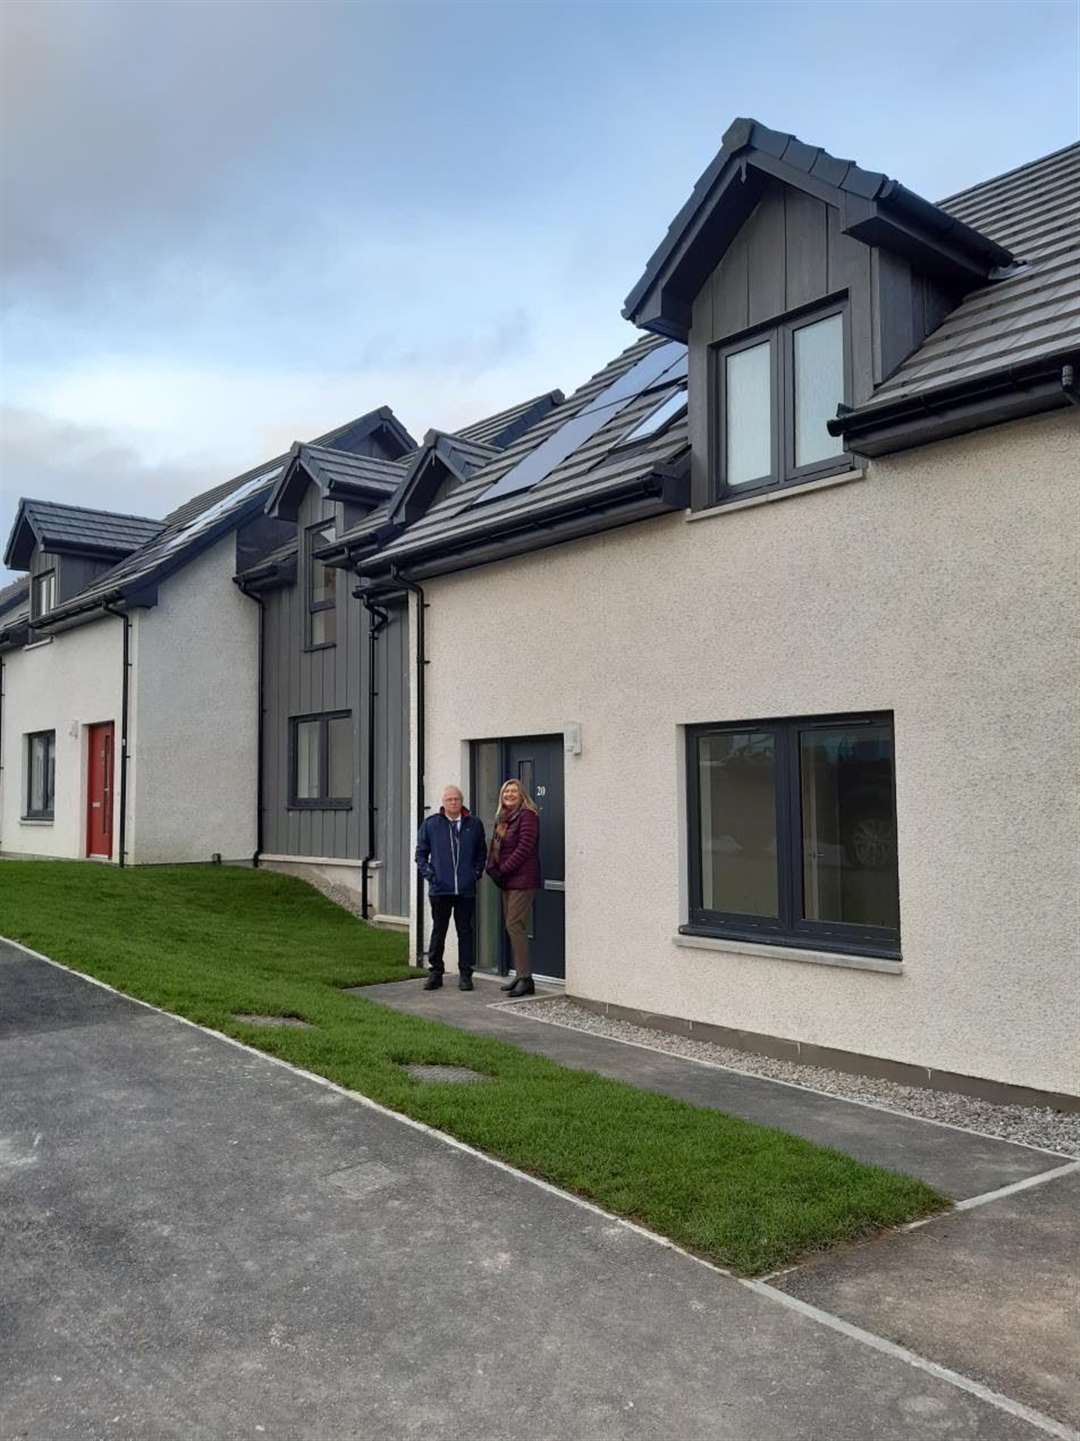 Pictured outside one of the new homes are Councillor Ian Cockburn and acting principal housing officer, Janice Neil.